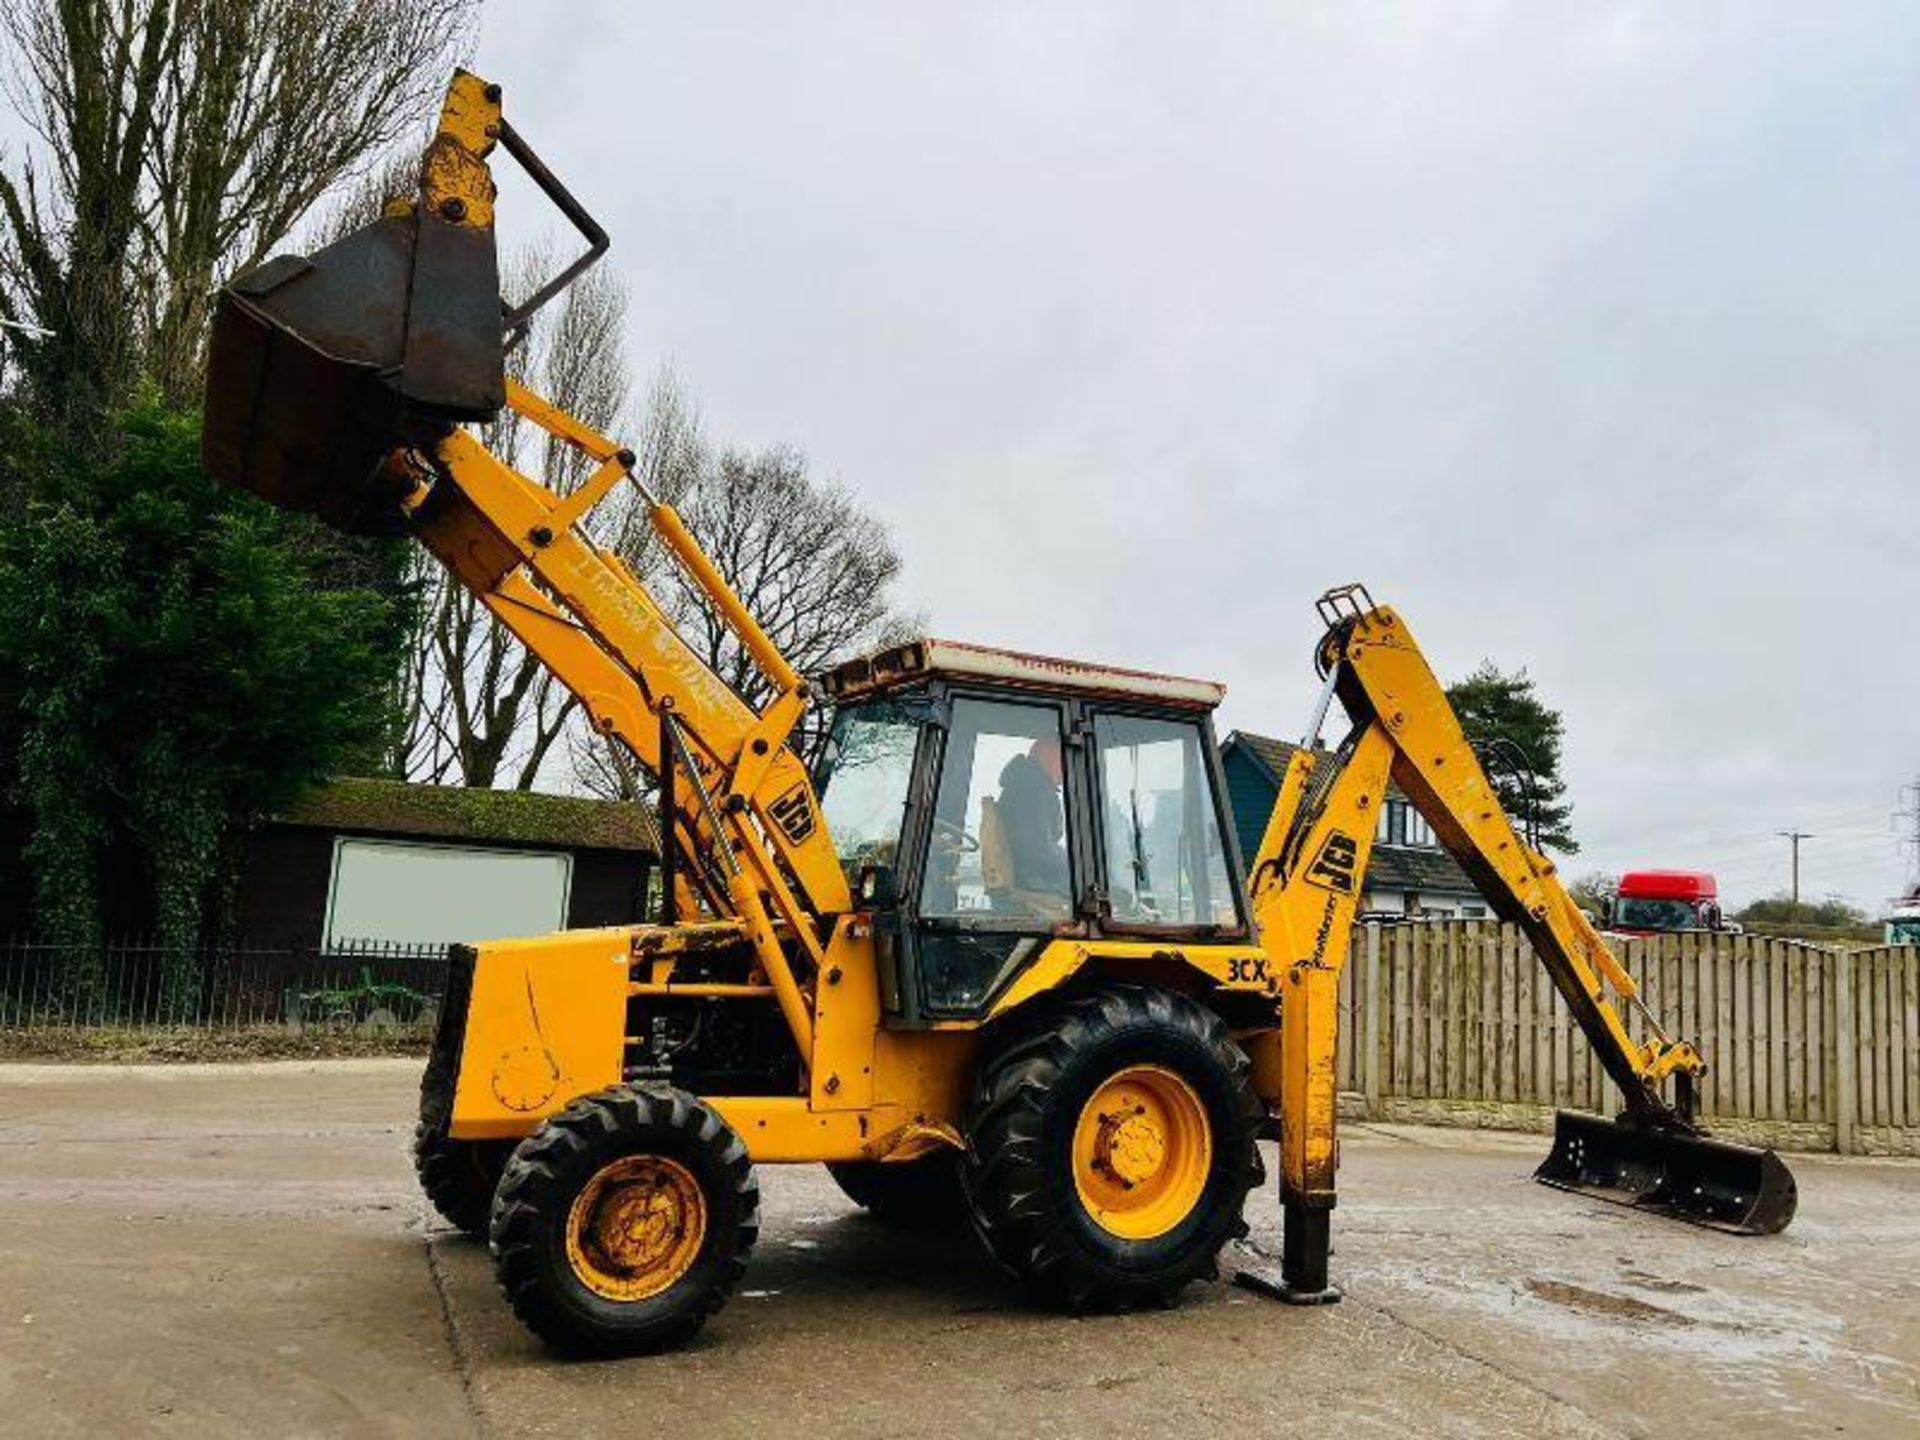 JCB 3CX PROJECT 7 4WD BACKHOE DIGGER C/W PROJECT 8 BACK END - Image 16 of 16